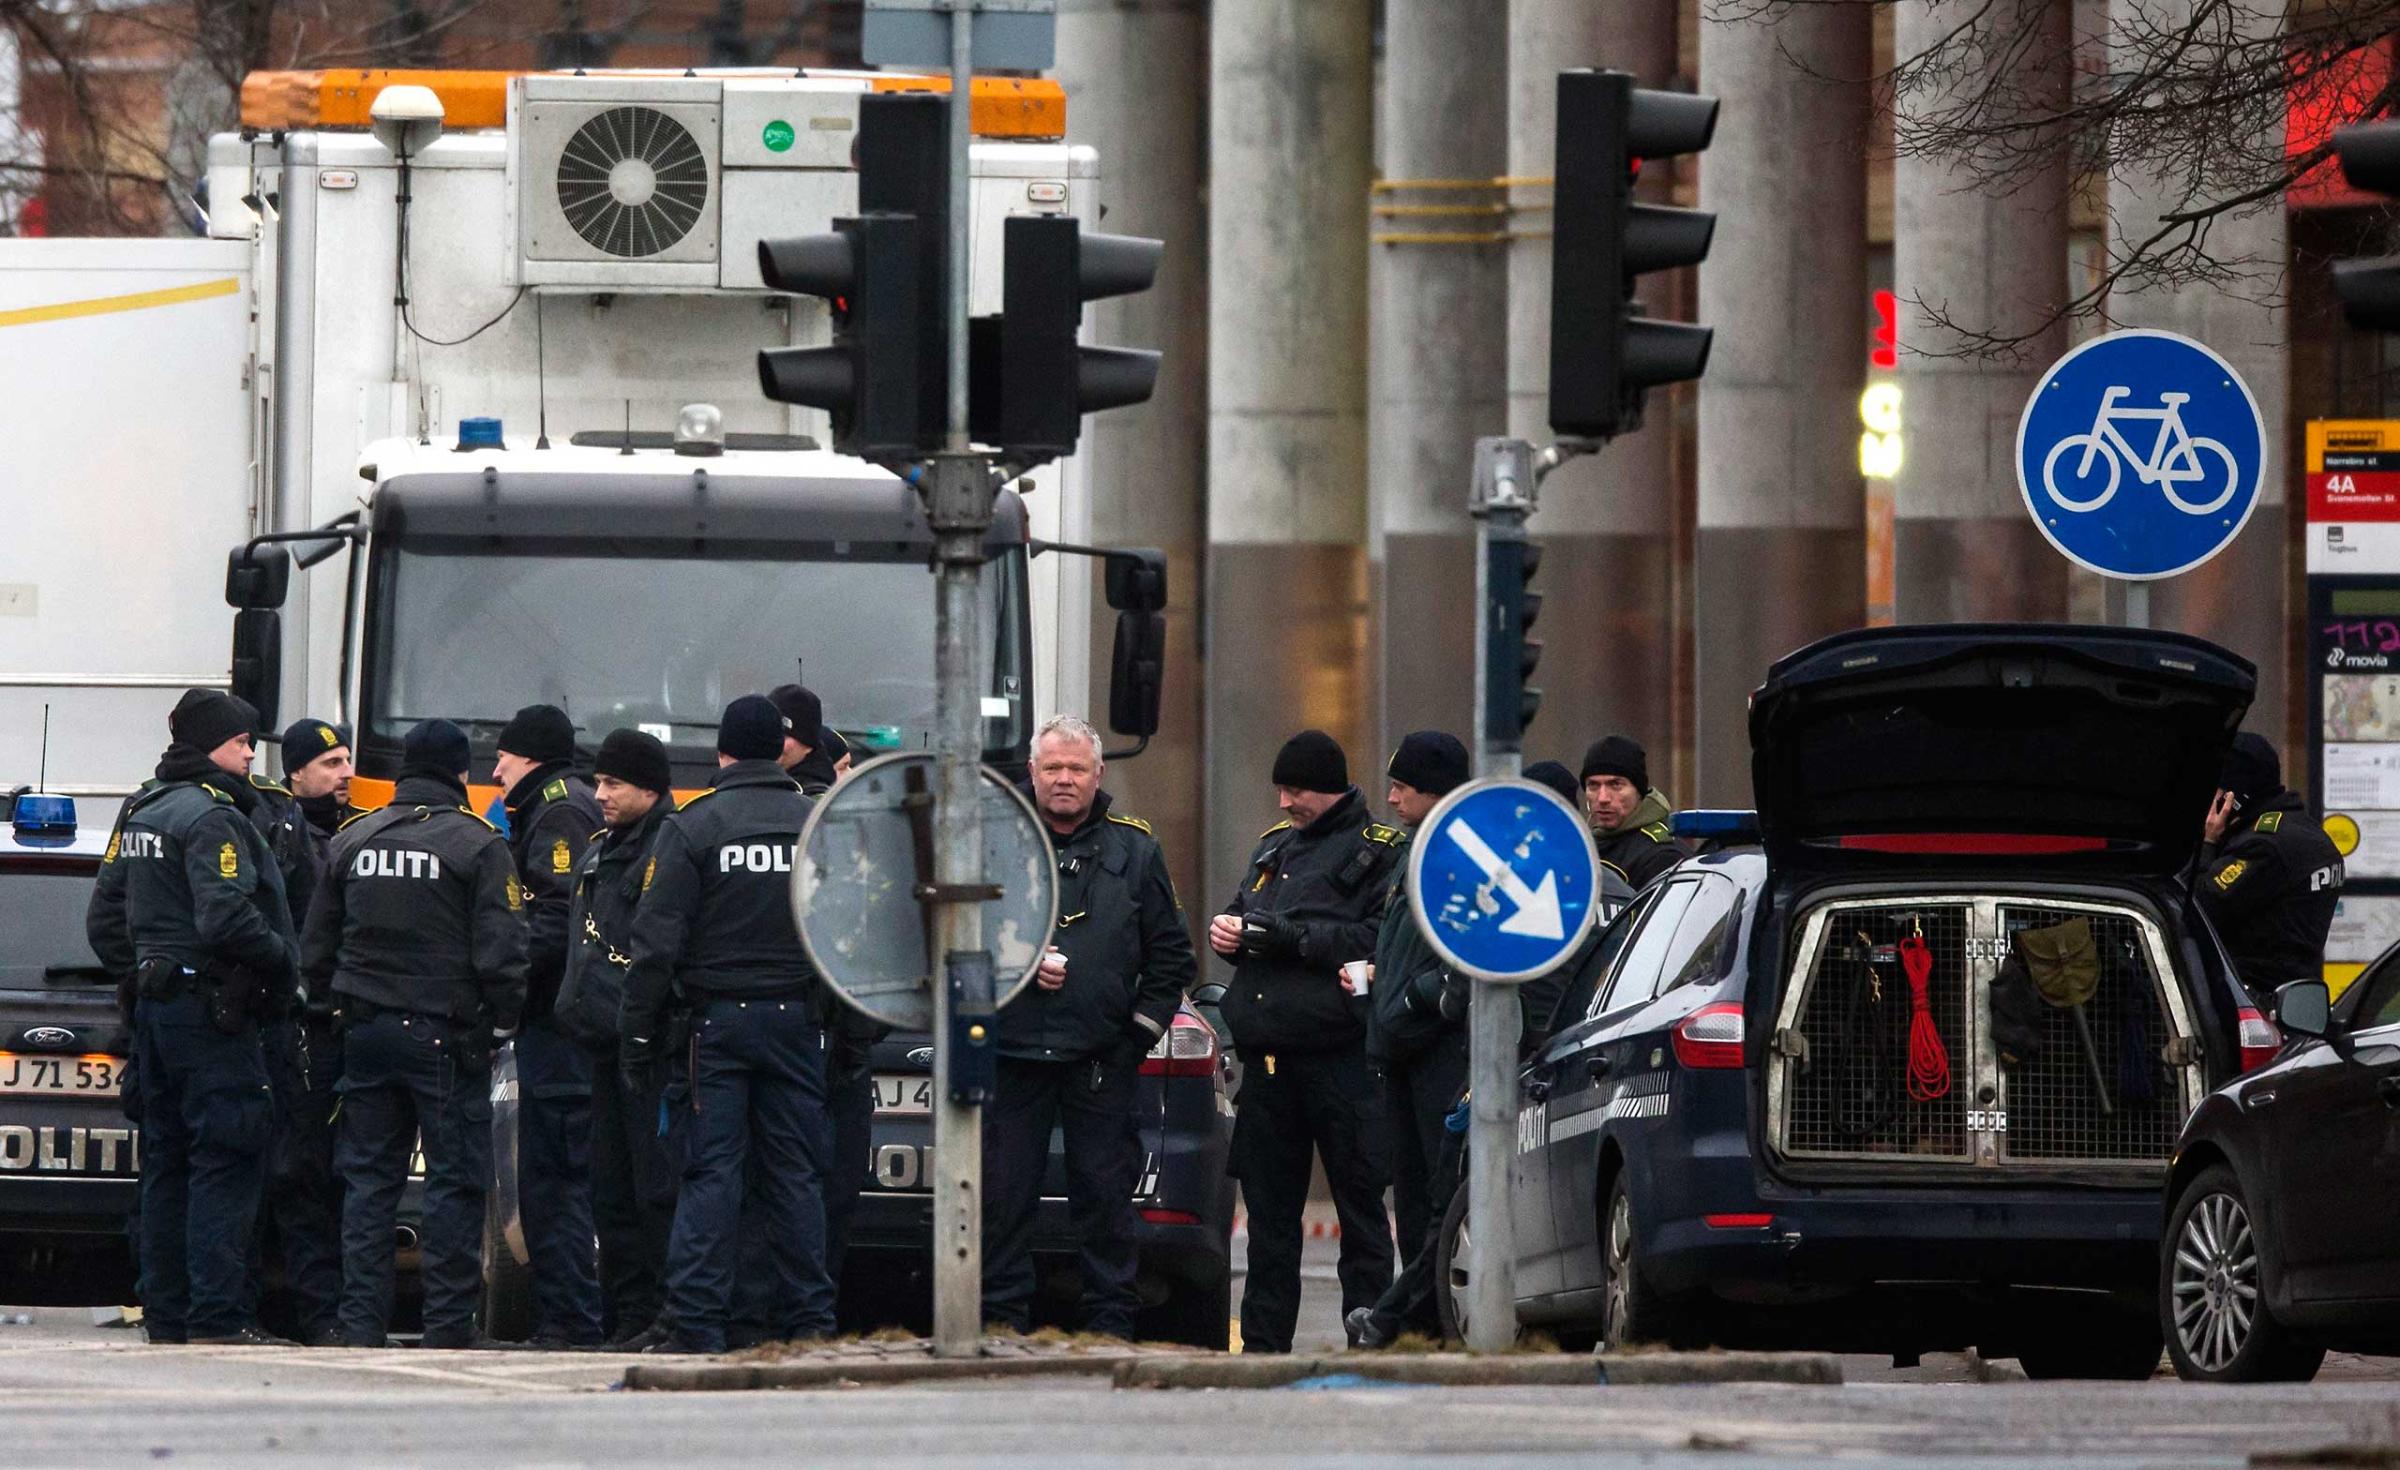 Police officers gather near the site where a man was killed by police, close to Norrebro Station, in Copenhagen, Feb. 15, 2015.